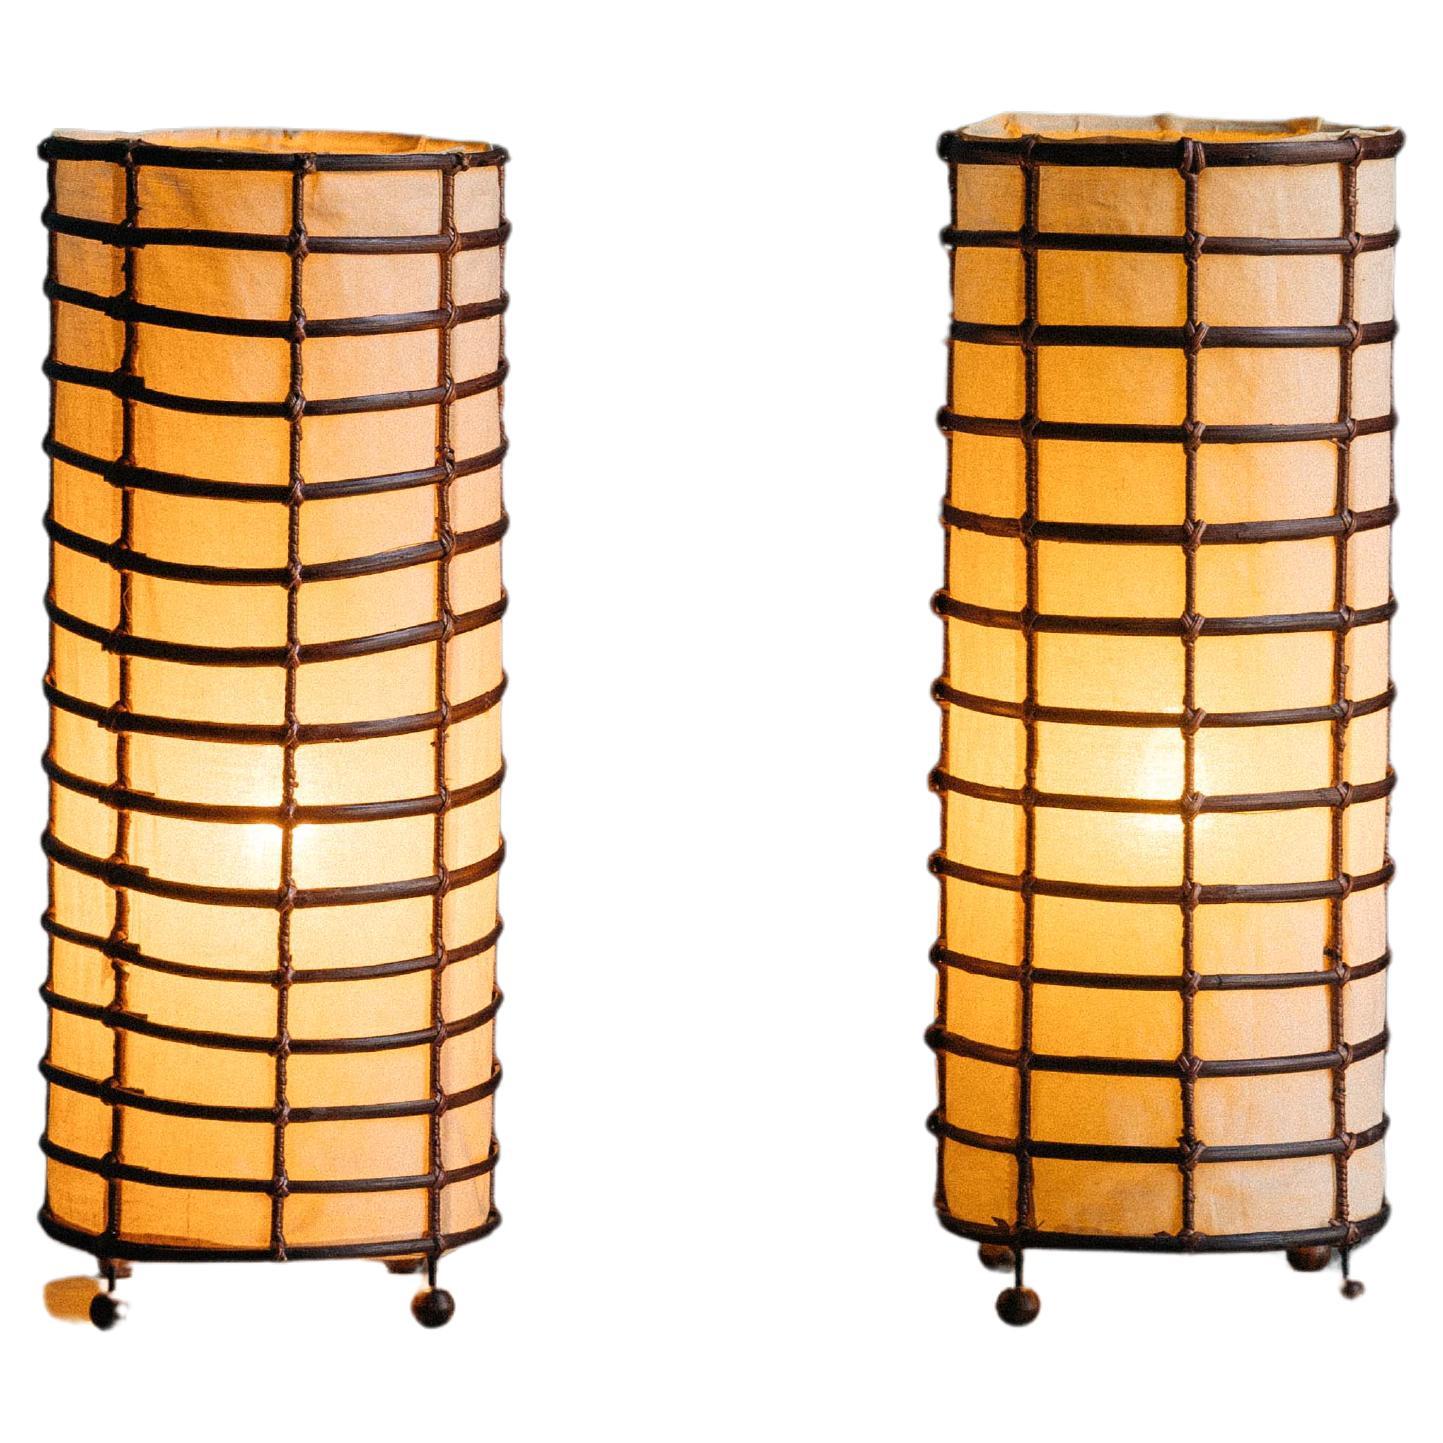 Rustic Rattan and Linen Lamps, France, 1970s For Sale